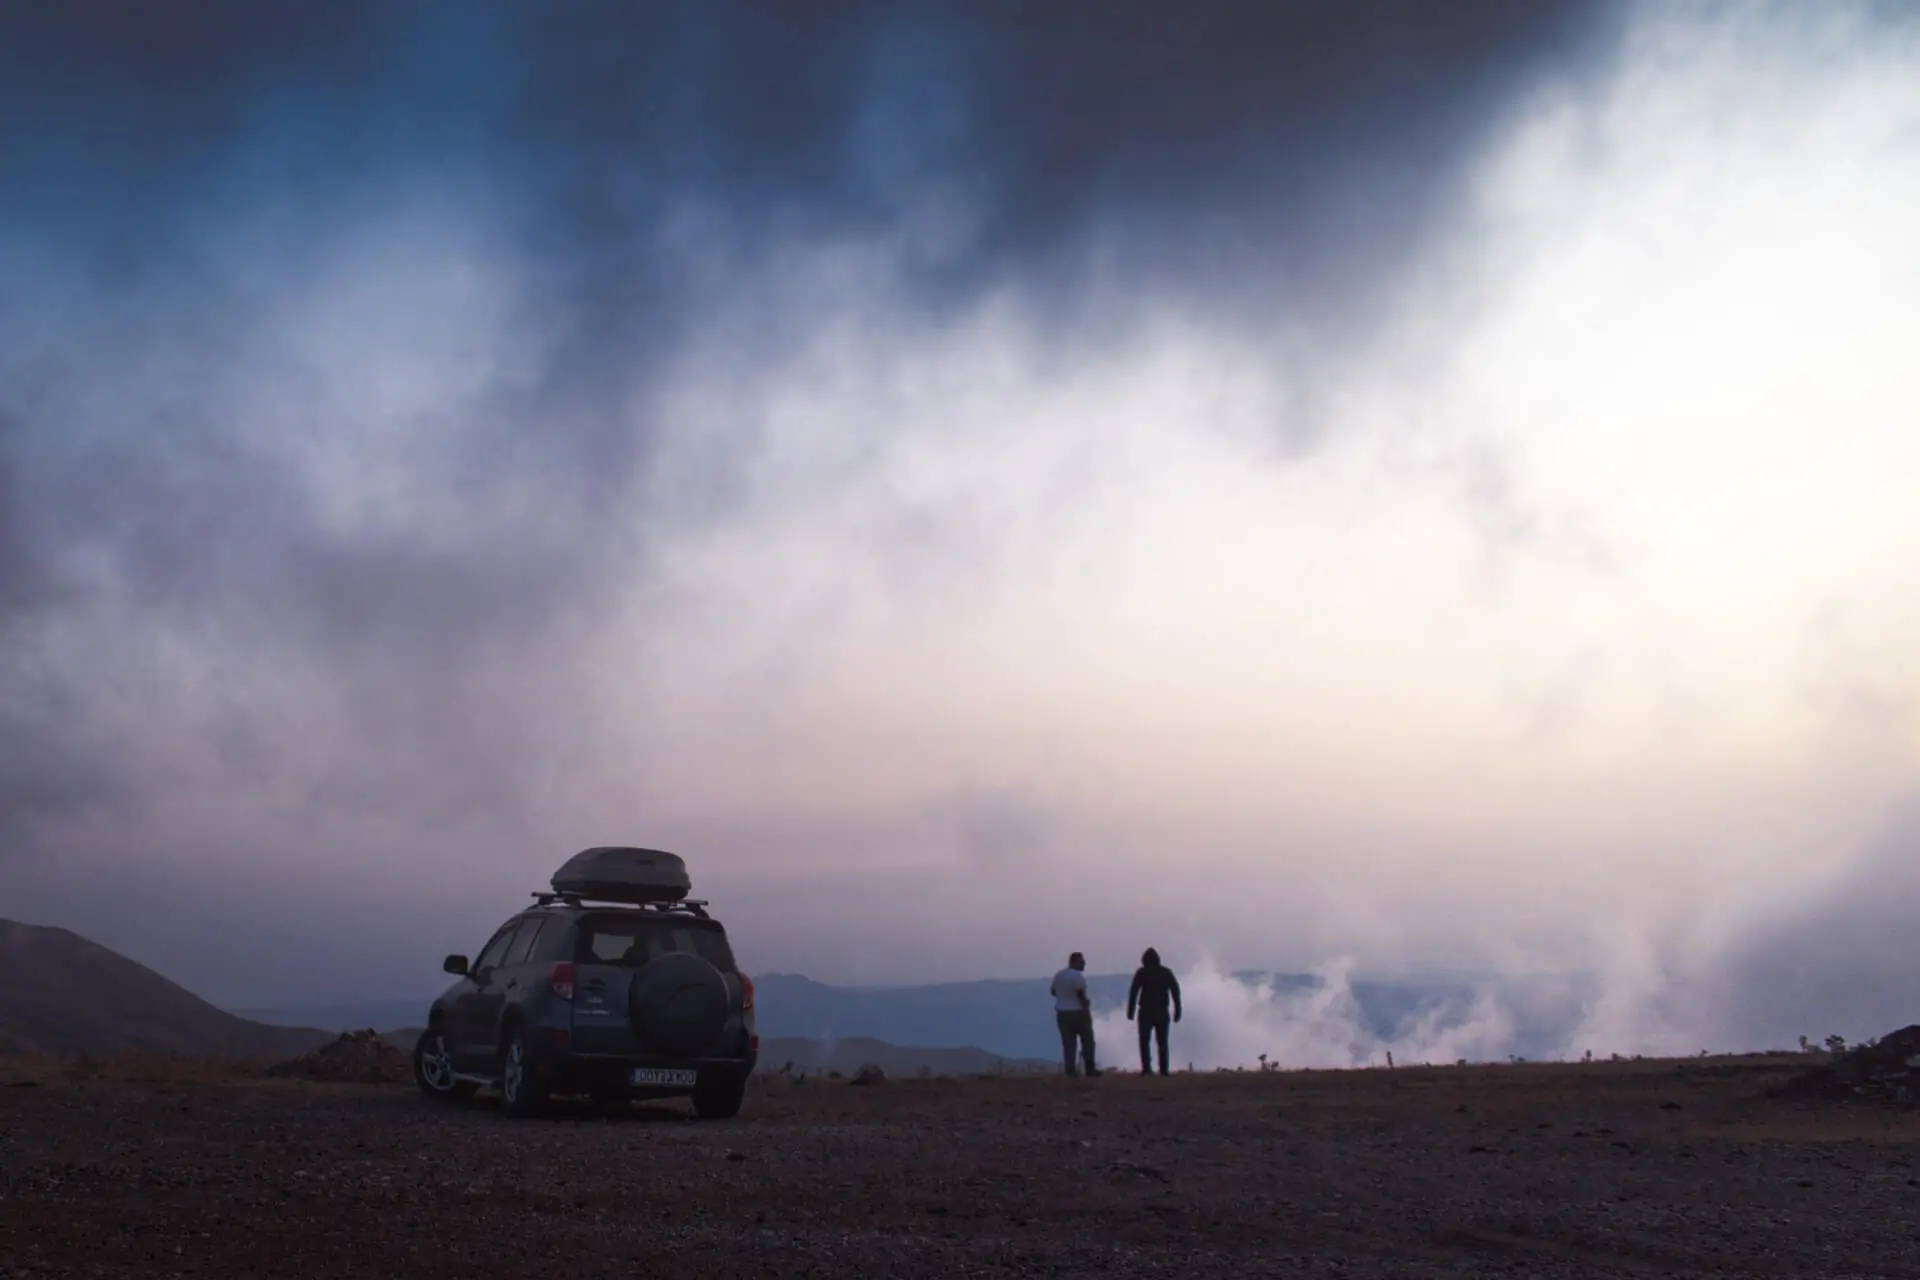 A travelling couple stand by their rental car on a misty morning in Greece